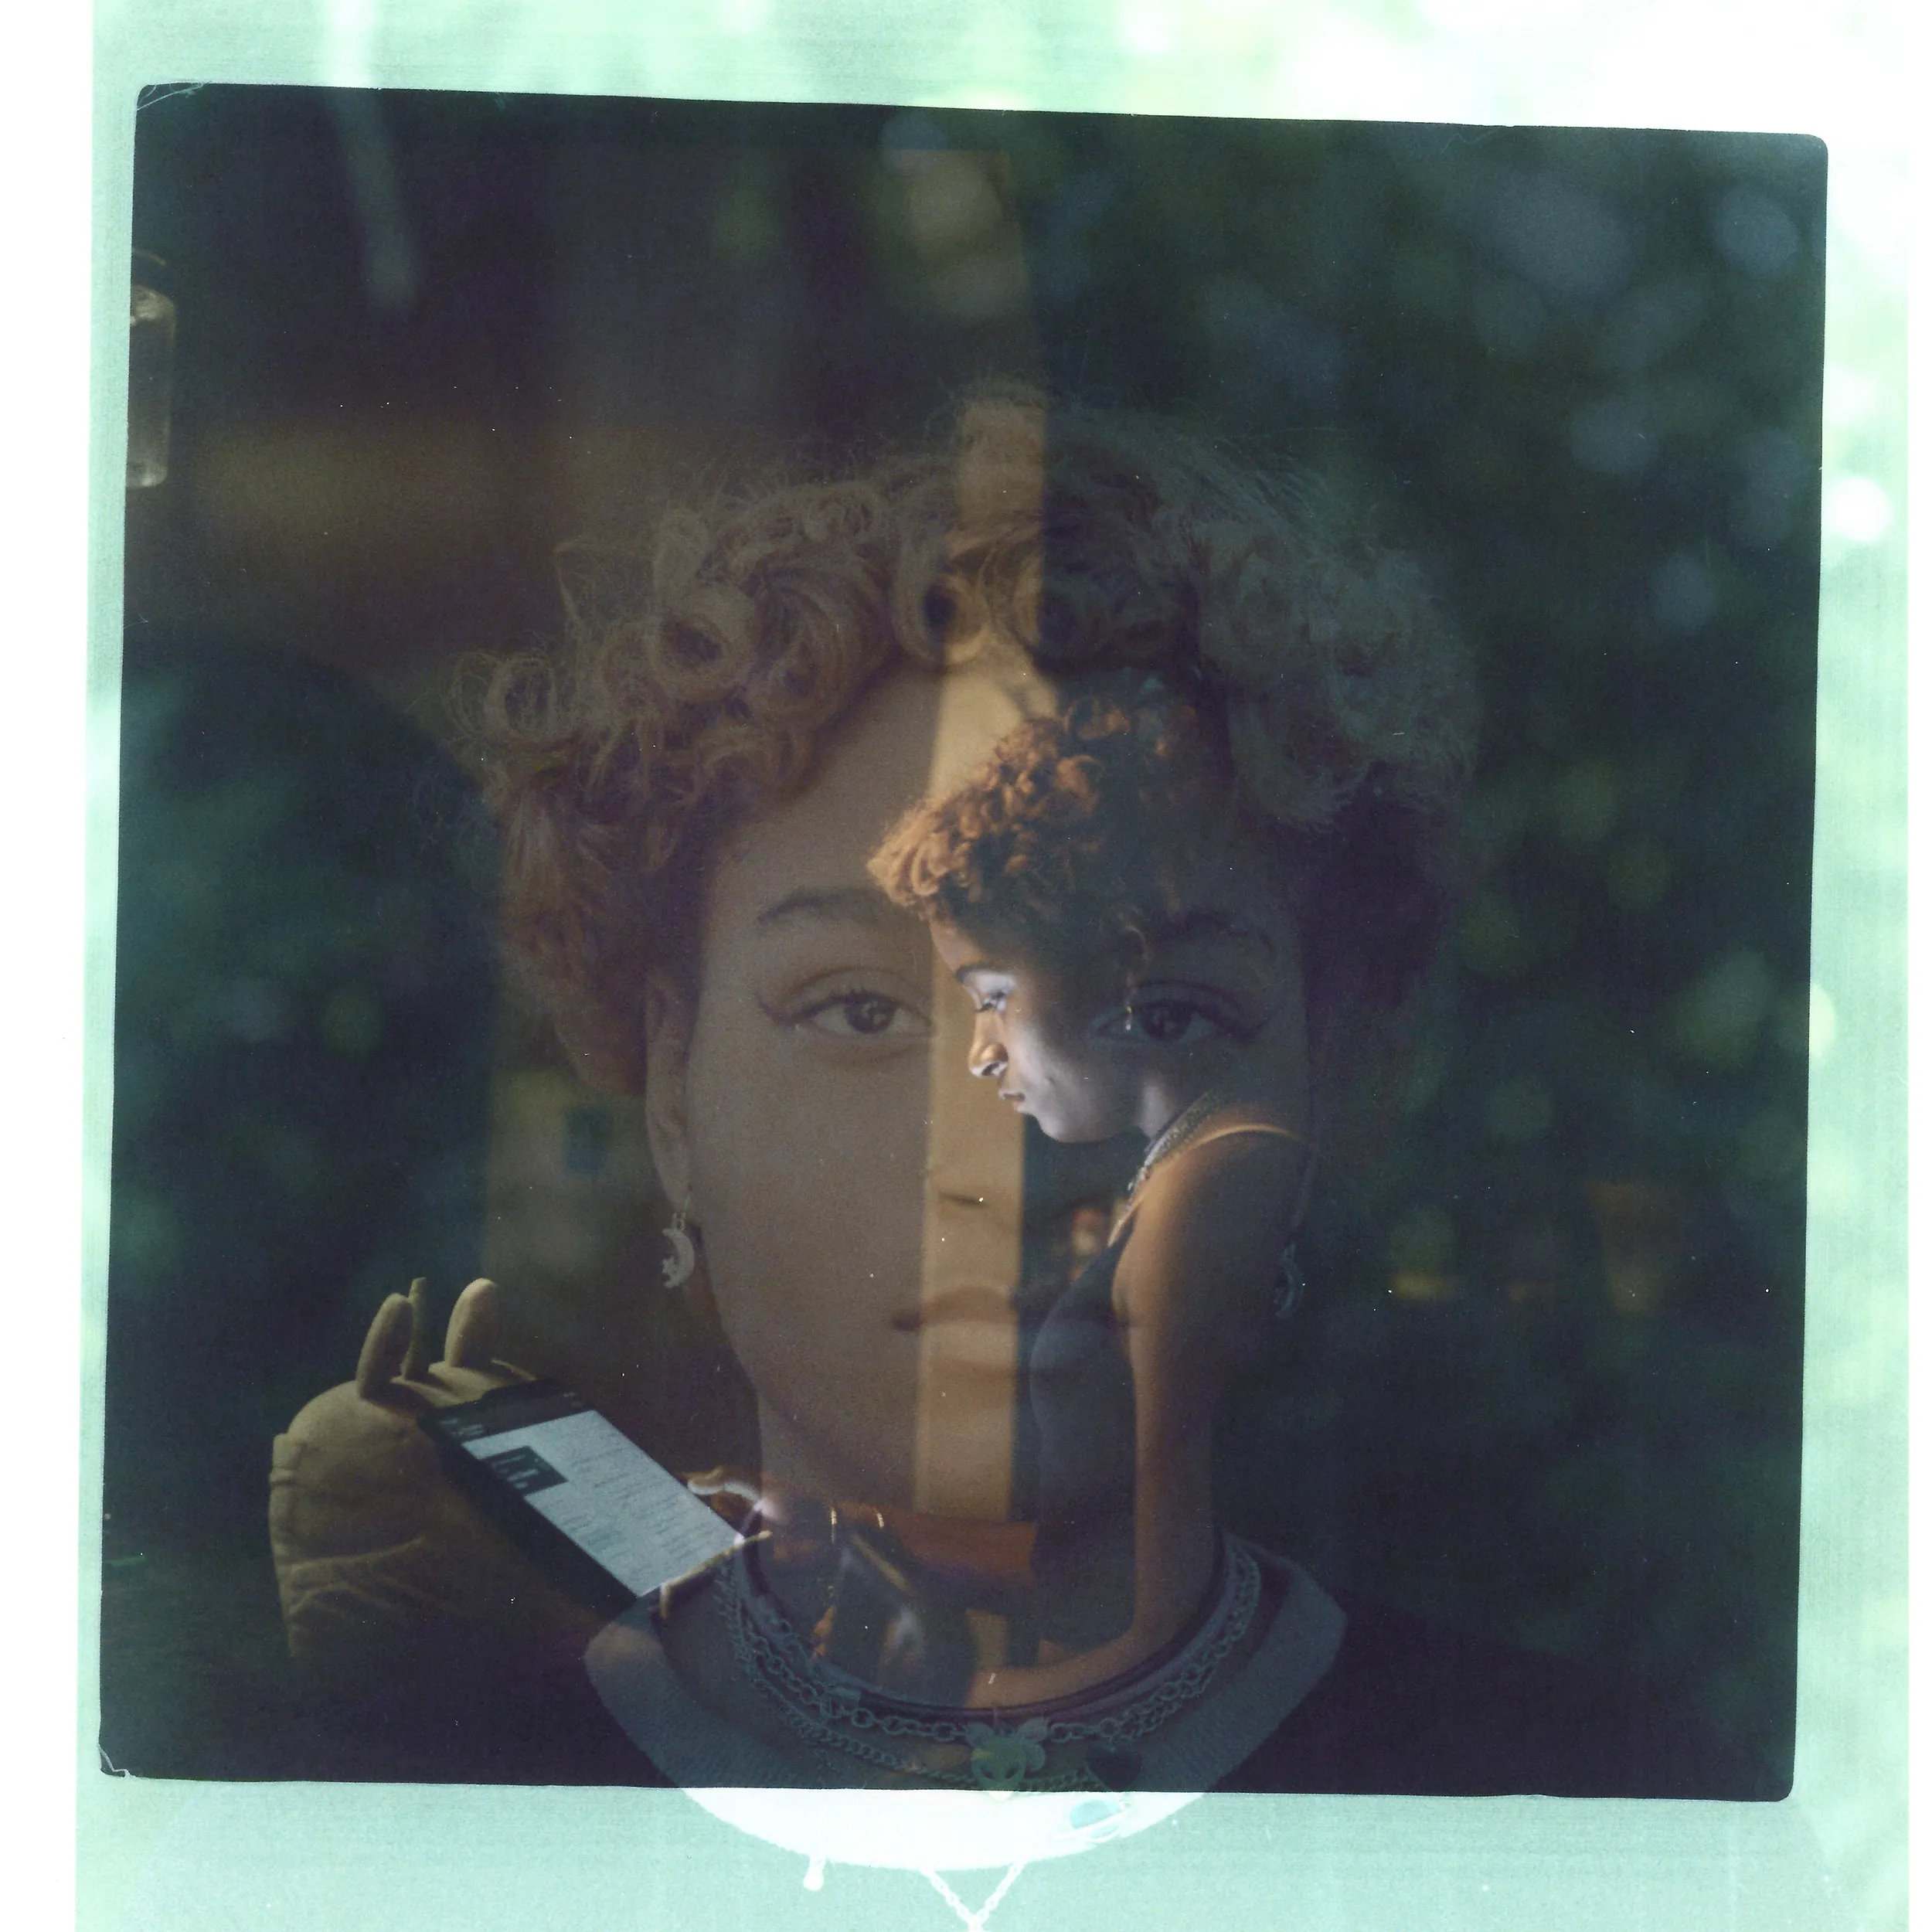 A double exposure made from a headshot of Navada Gwynn layered with a photo of her working on a tablet.